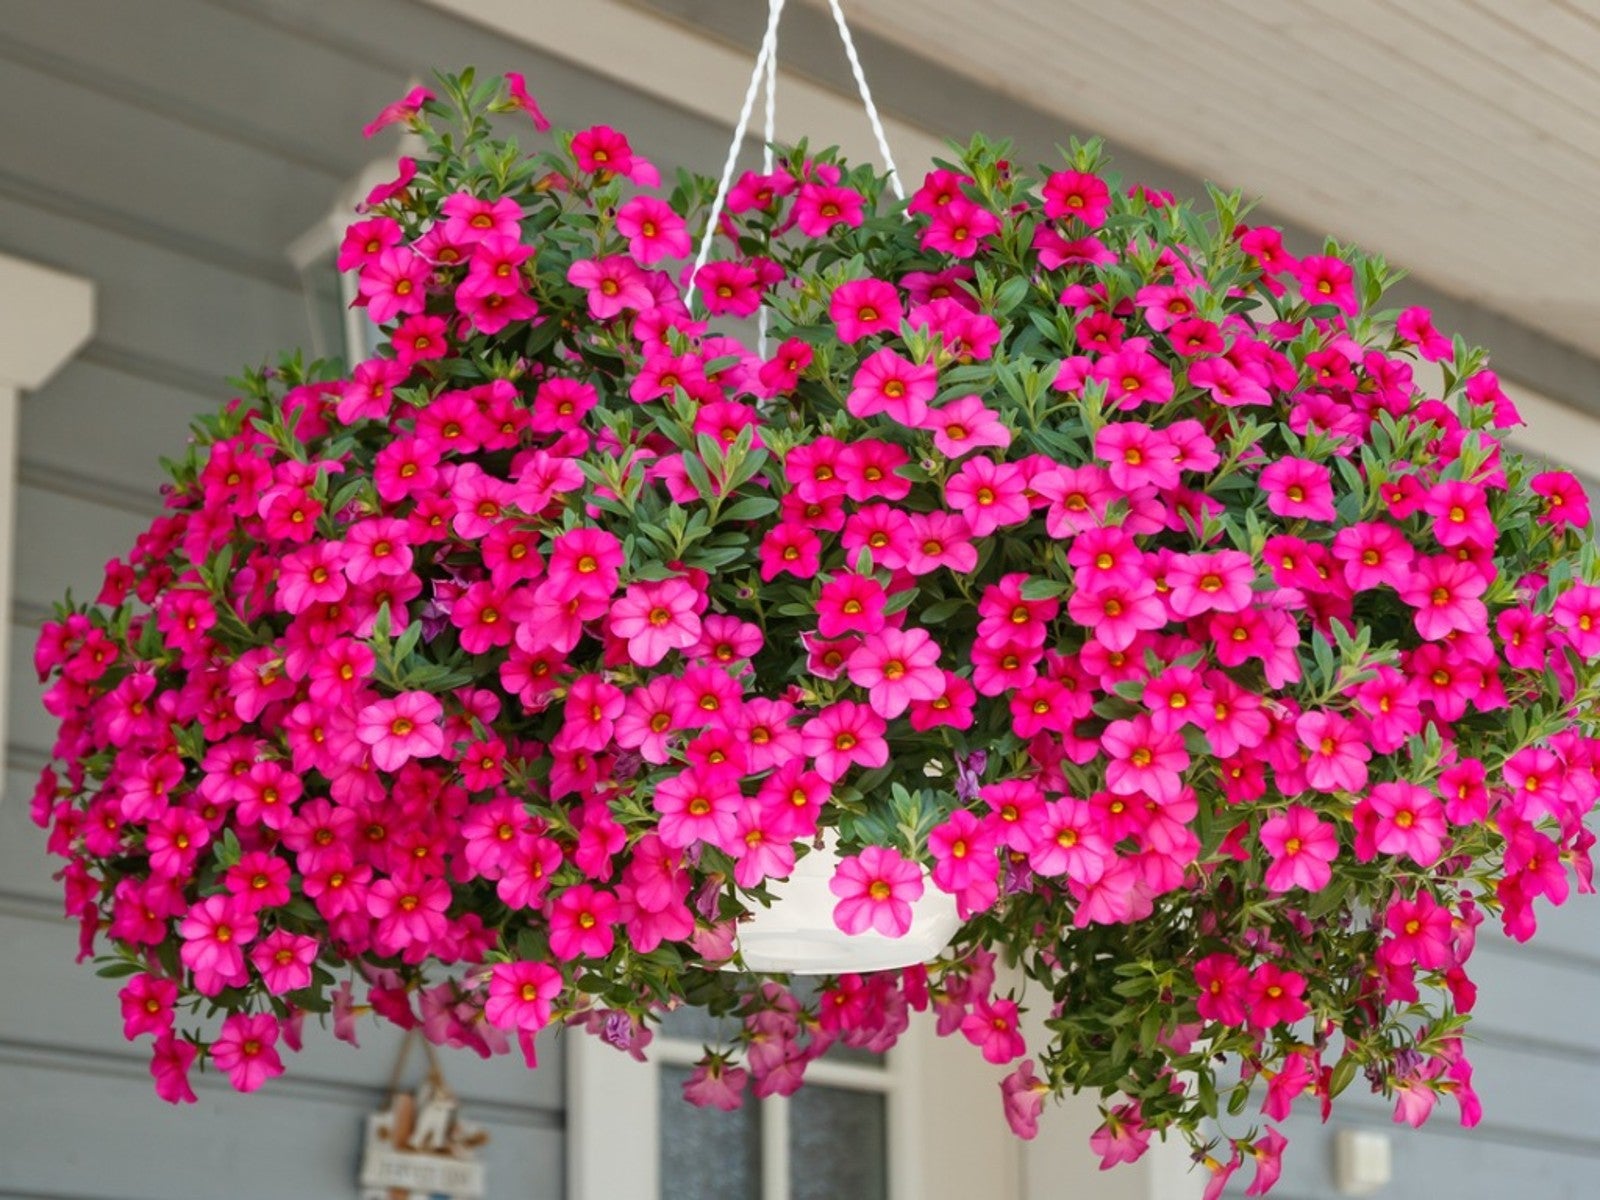 Best Plants for Hanging Baskets Full Sun: Vibrant Blooms All Summer